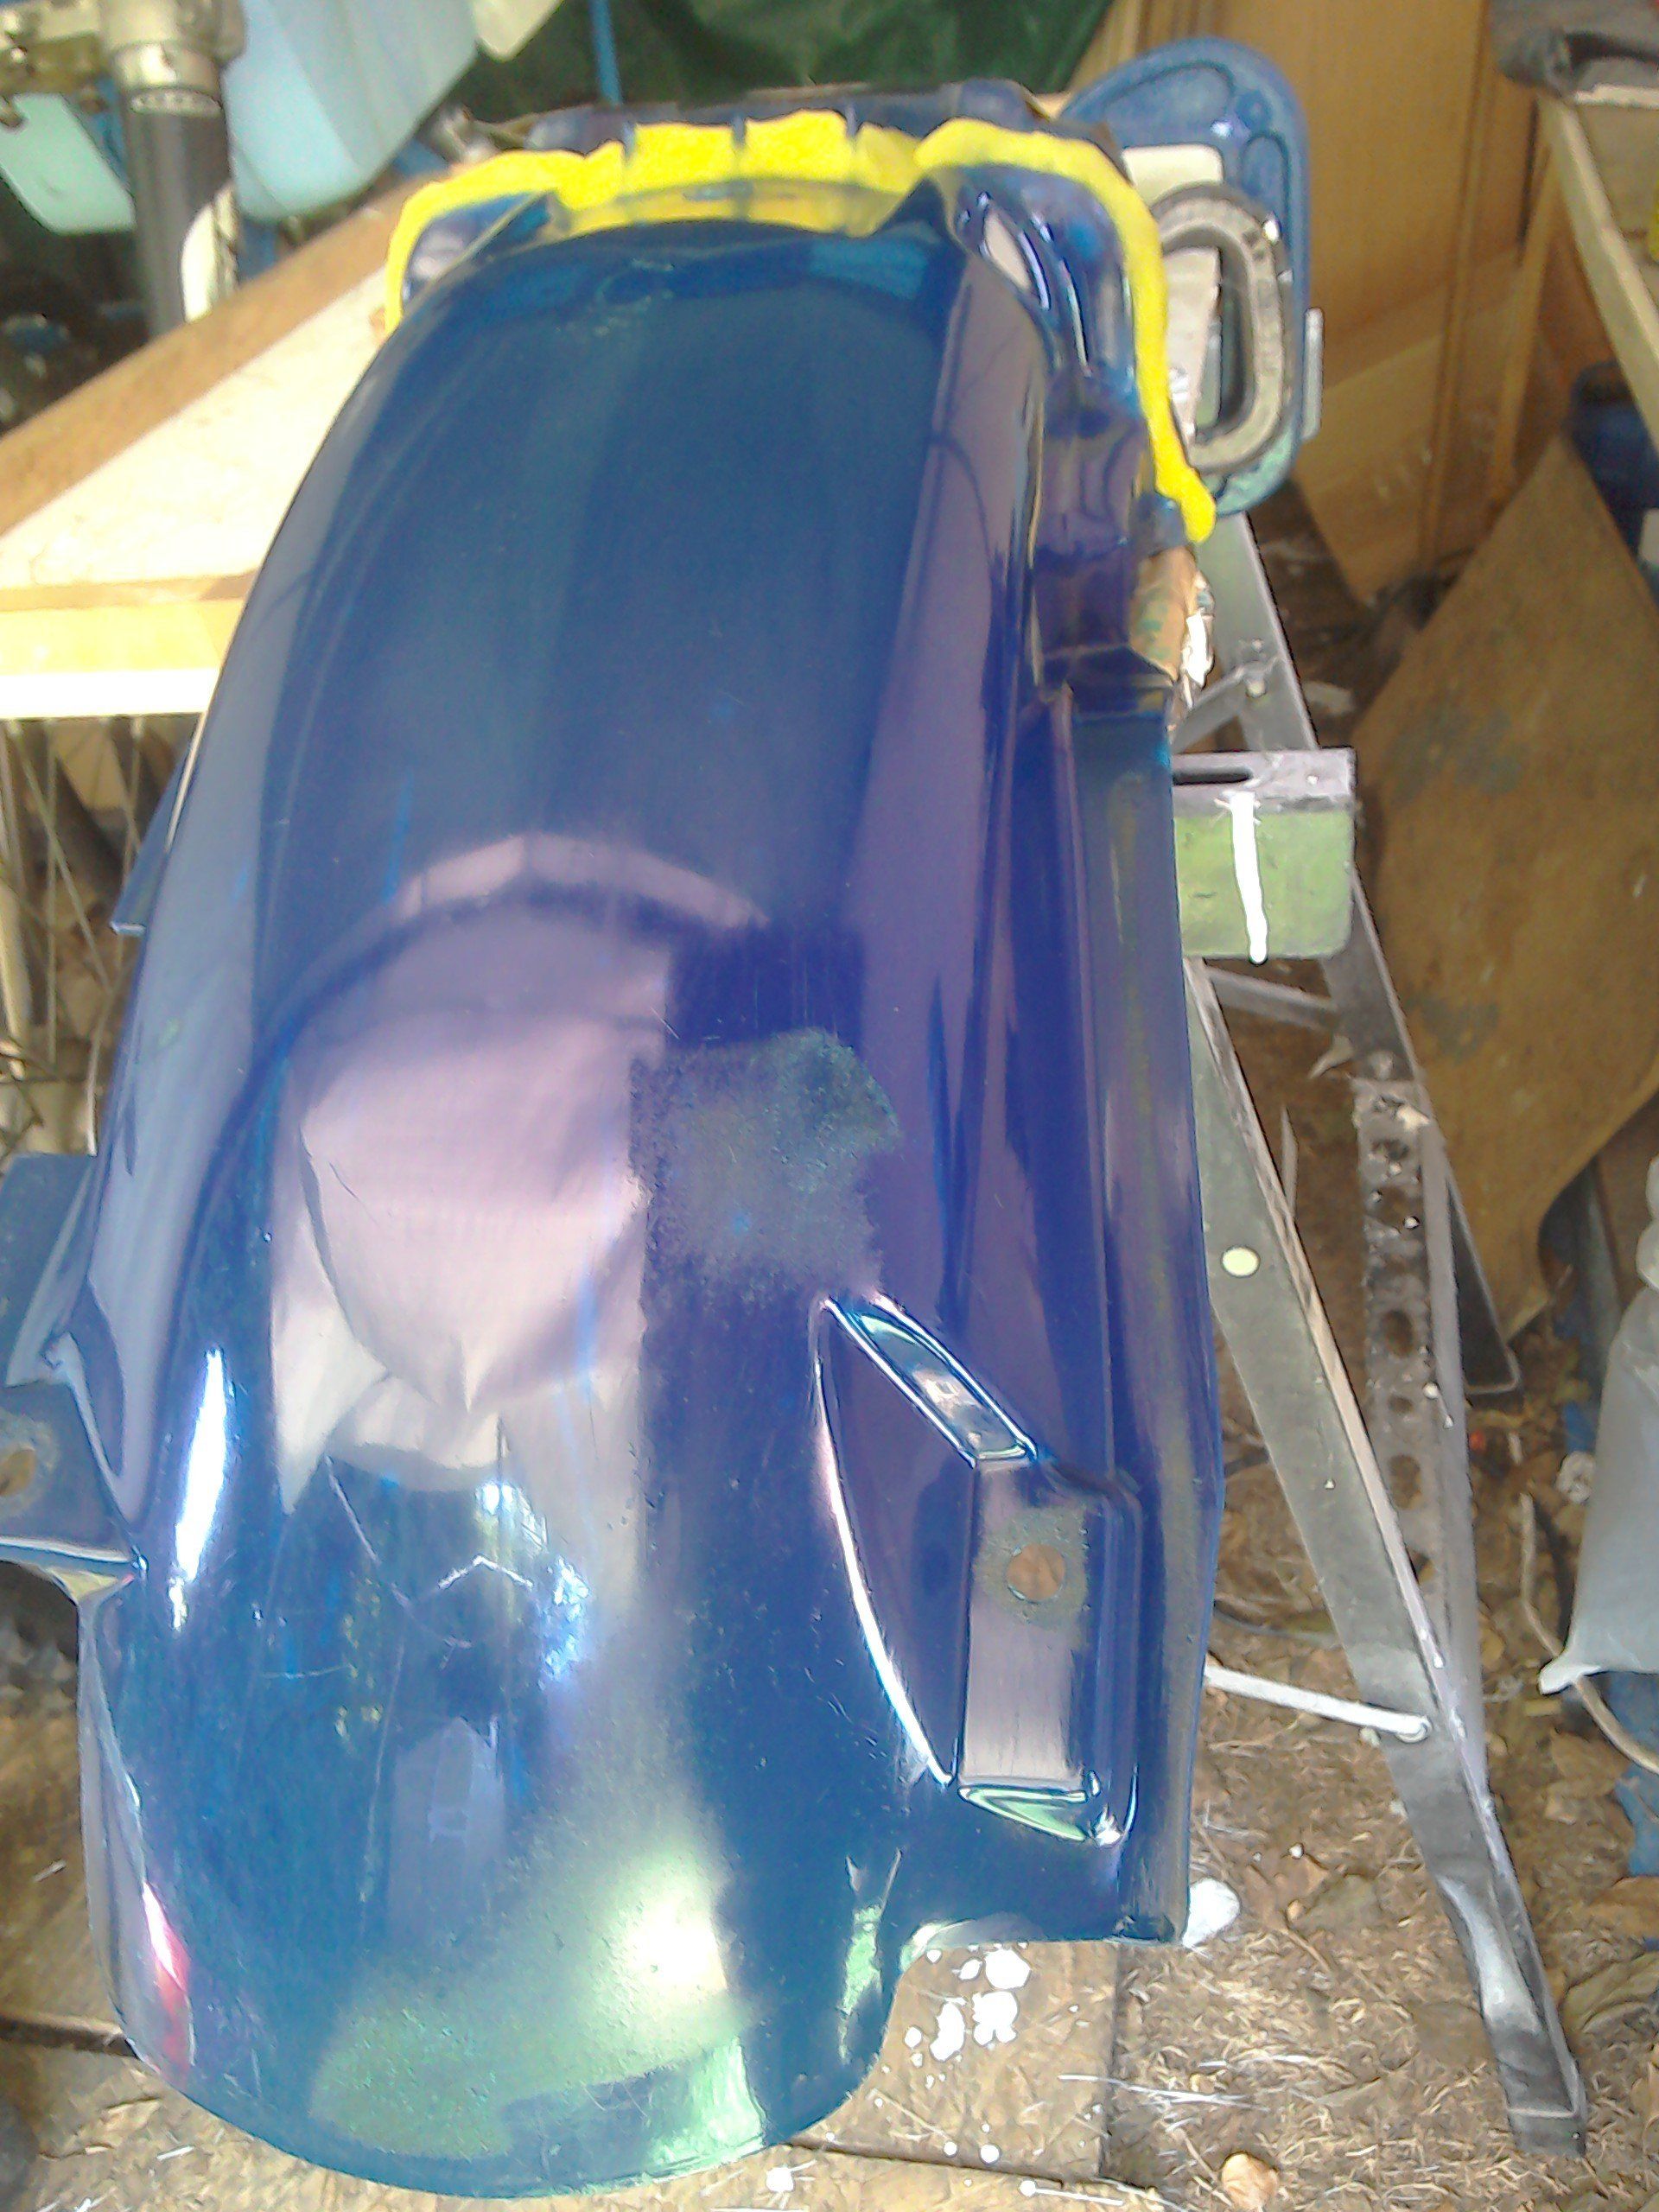 Mudguard PVA applied and wax barrier added